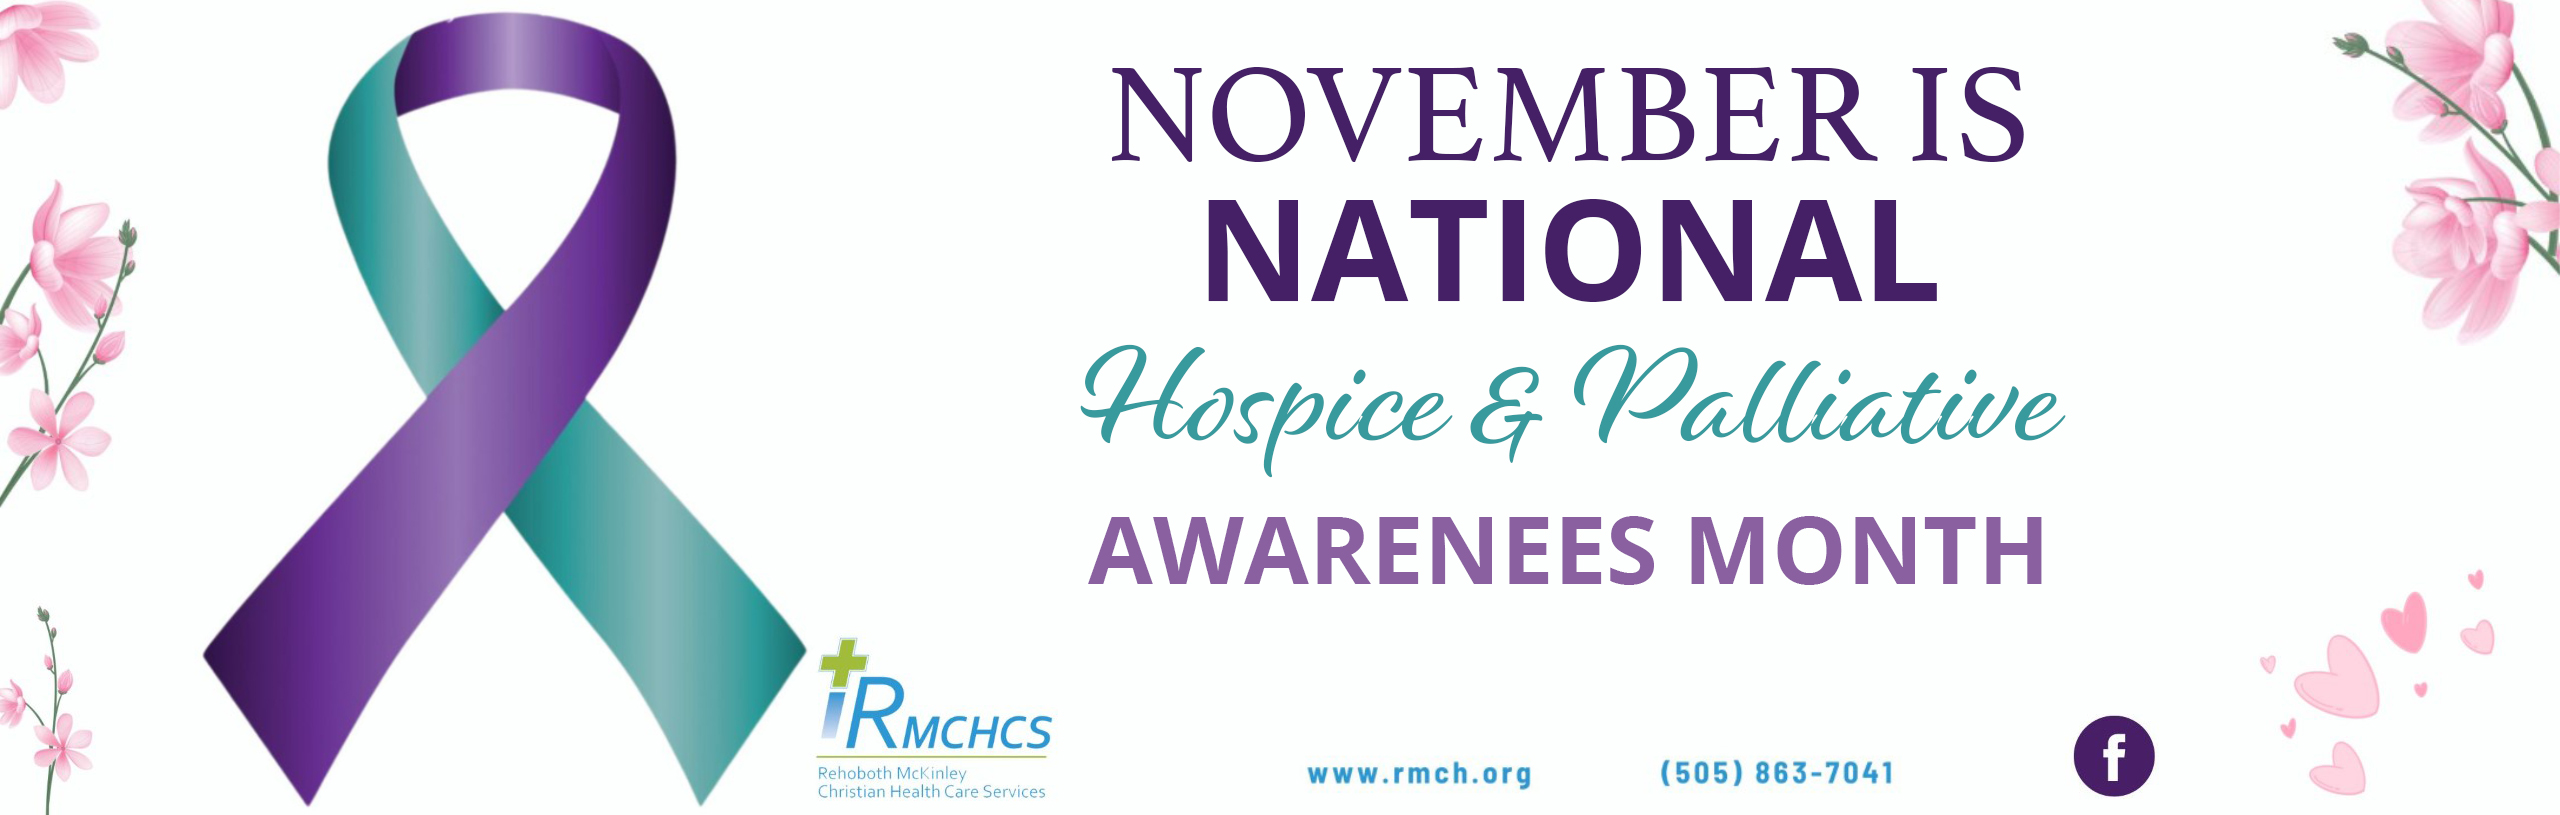 NOVEMBER IS NATIONAL 
Hospice & Palliative 
AWARENESS MONTH
RMCHCS
Rehoboth Mckinley Christian Services
www.rmch.org
)505) 863-7041
(f) facebook icon